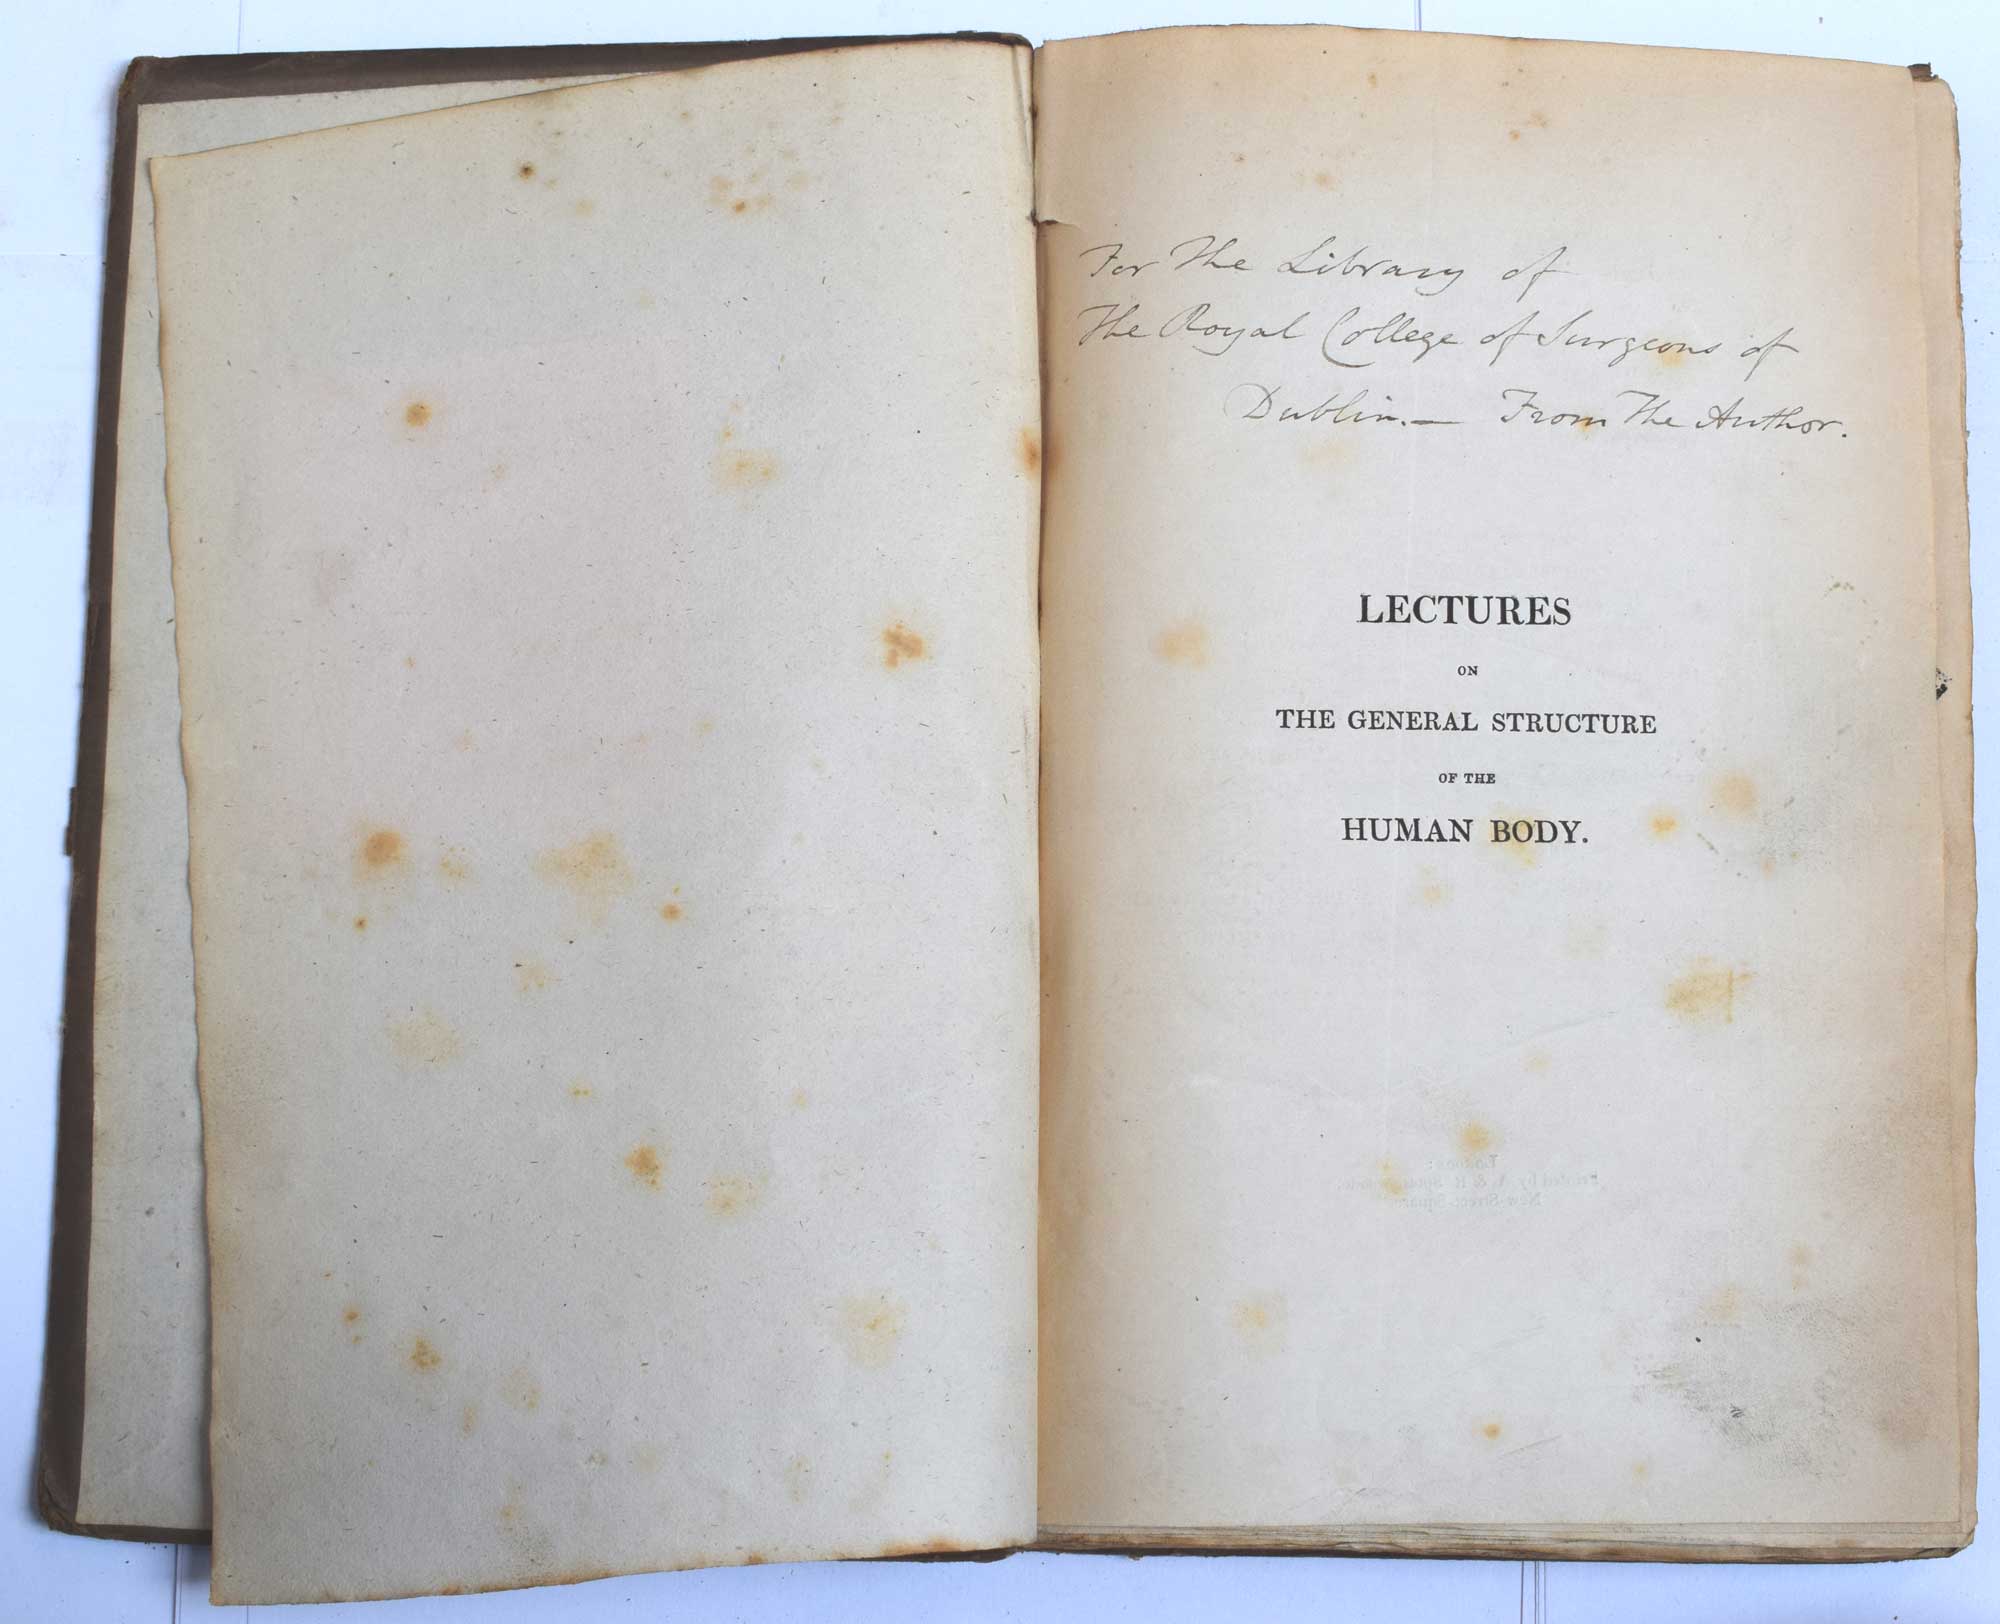 Lectures on the General Structure of the Human Body, and on the Anatomy and Functions of the Skin; Delivered Before the Royal College of Surgeons in London, in the Courses for 1823. Author's inscription.